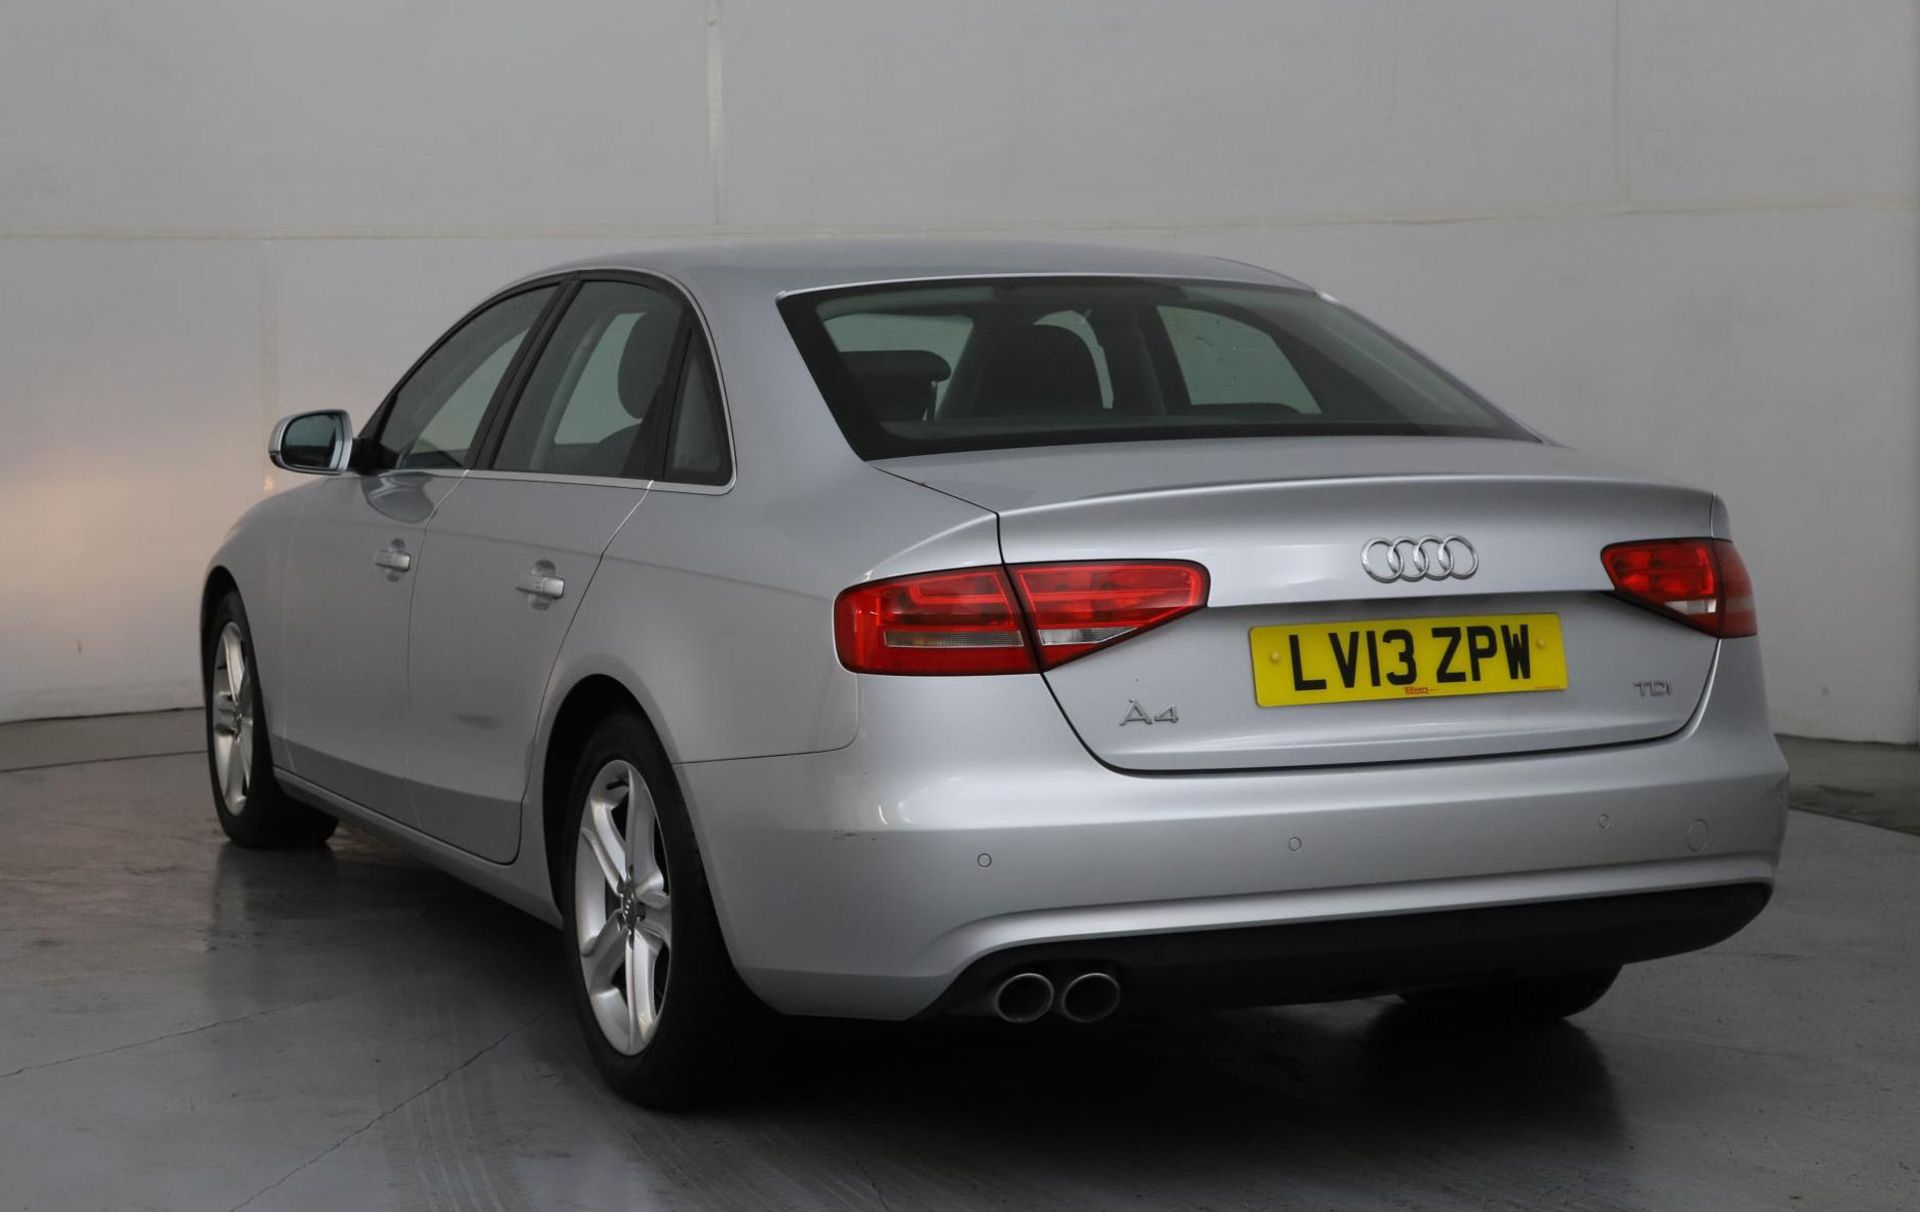 2013 Audi A4 2.0 Tdi SE 4 Door Saloon - CL505 - NO VAT ON THE HAMMER - Location: Corby - Image 4 of 12